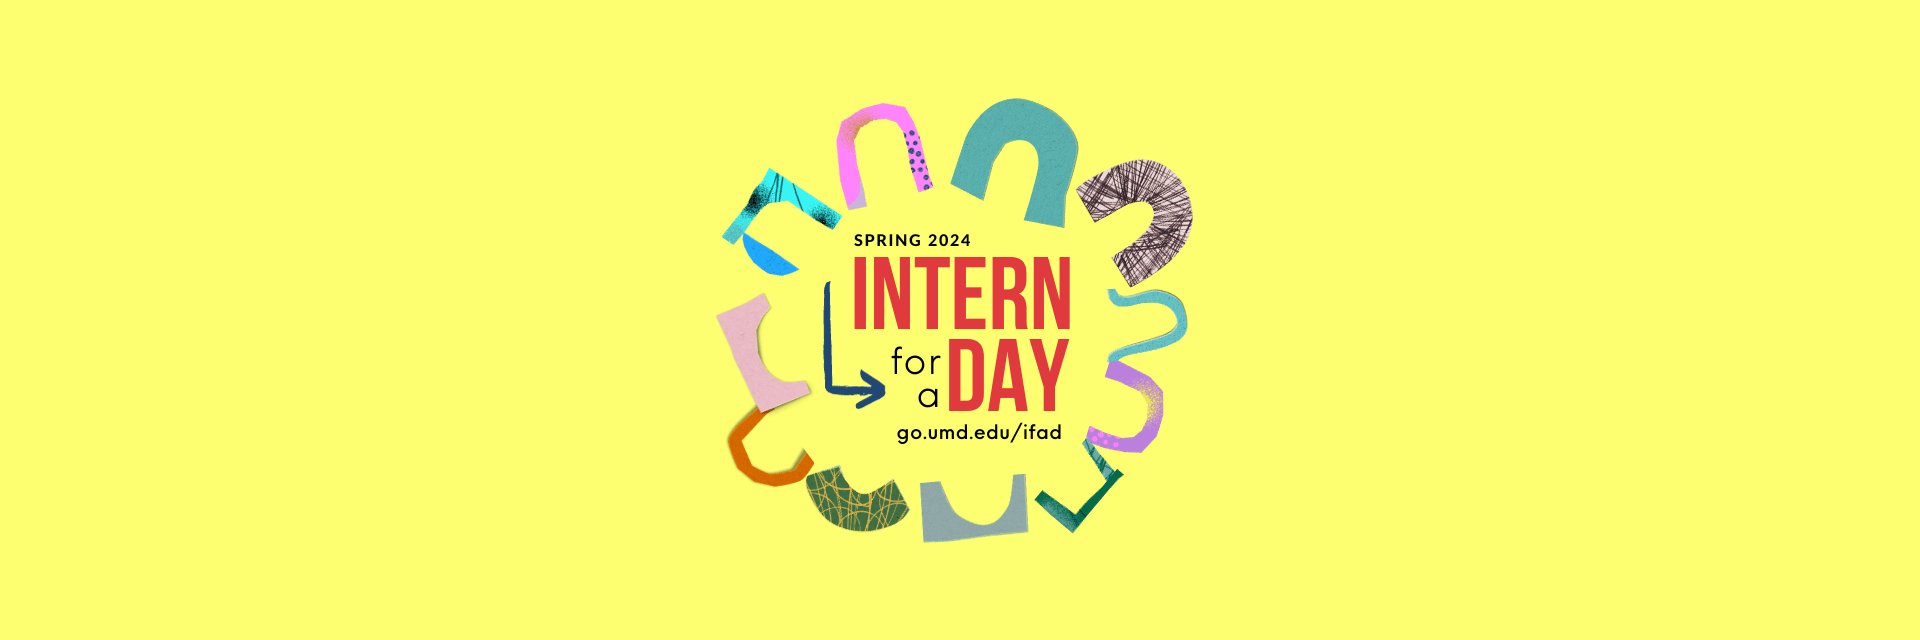 Intern for a day promotion, 